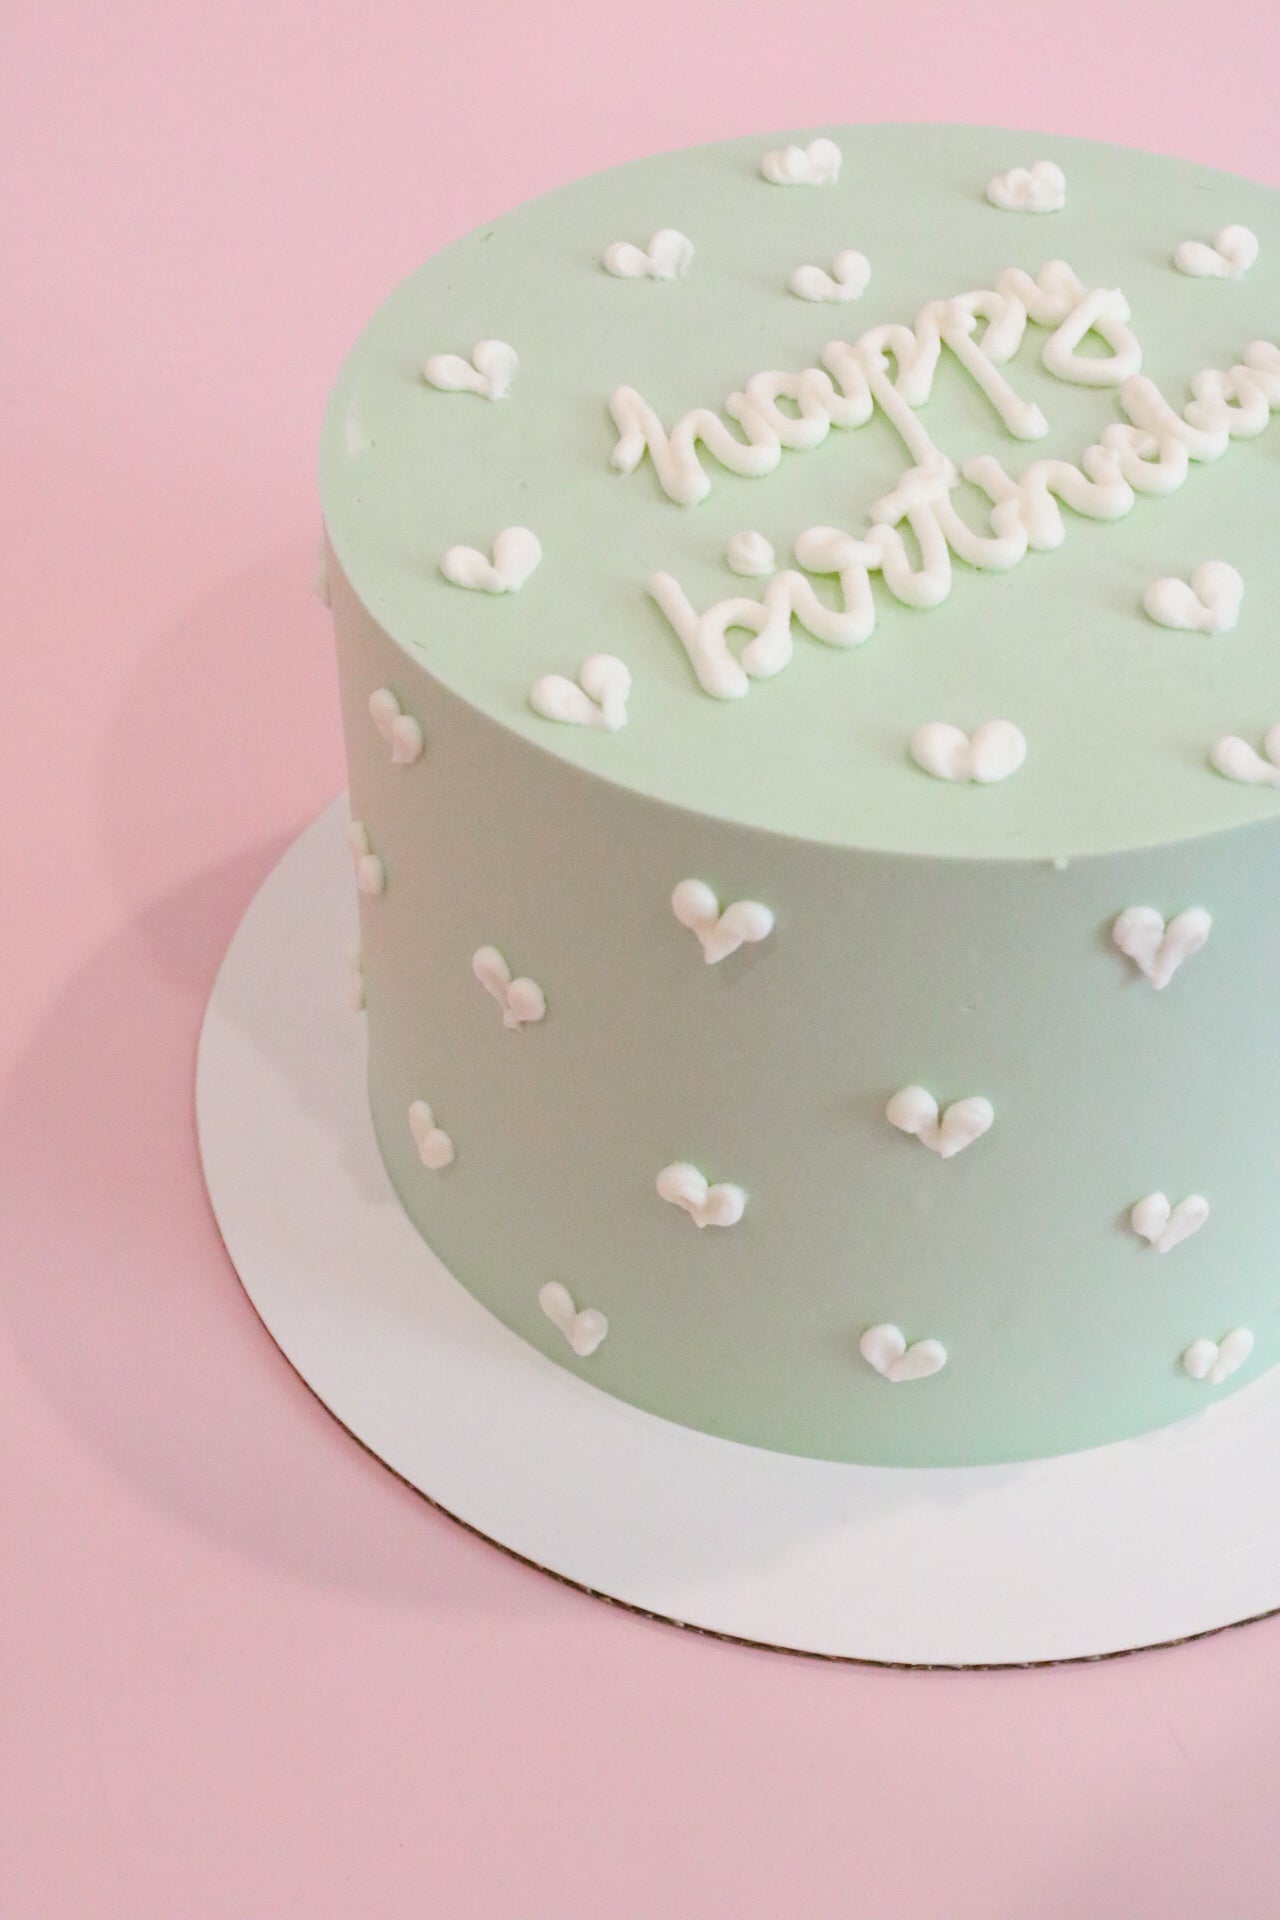 Light green cake with small white hearts and caption happy birthday.